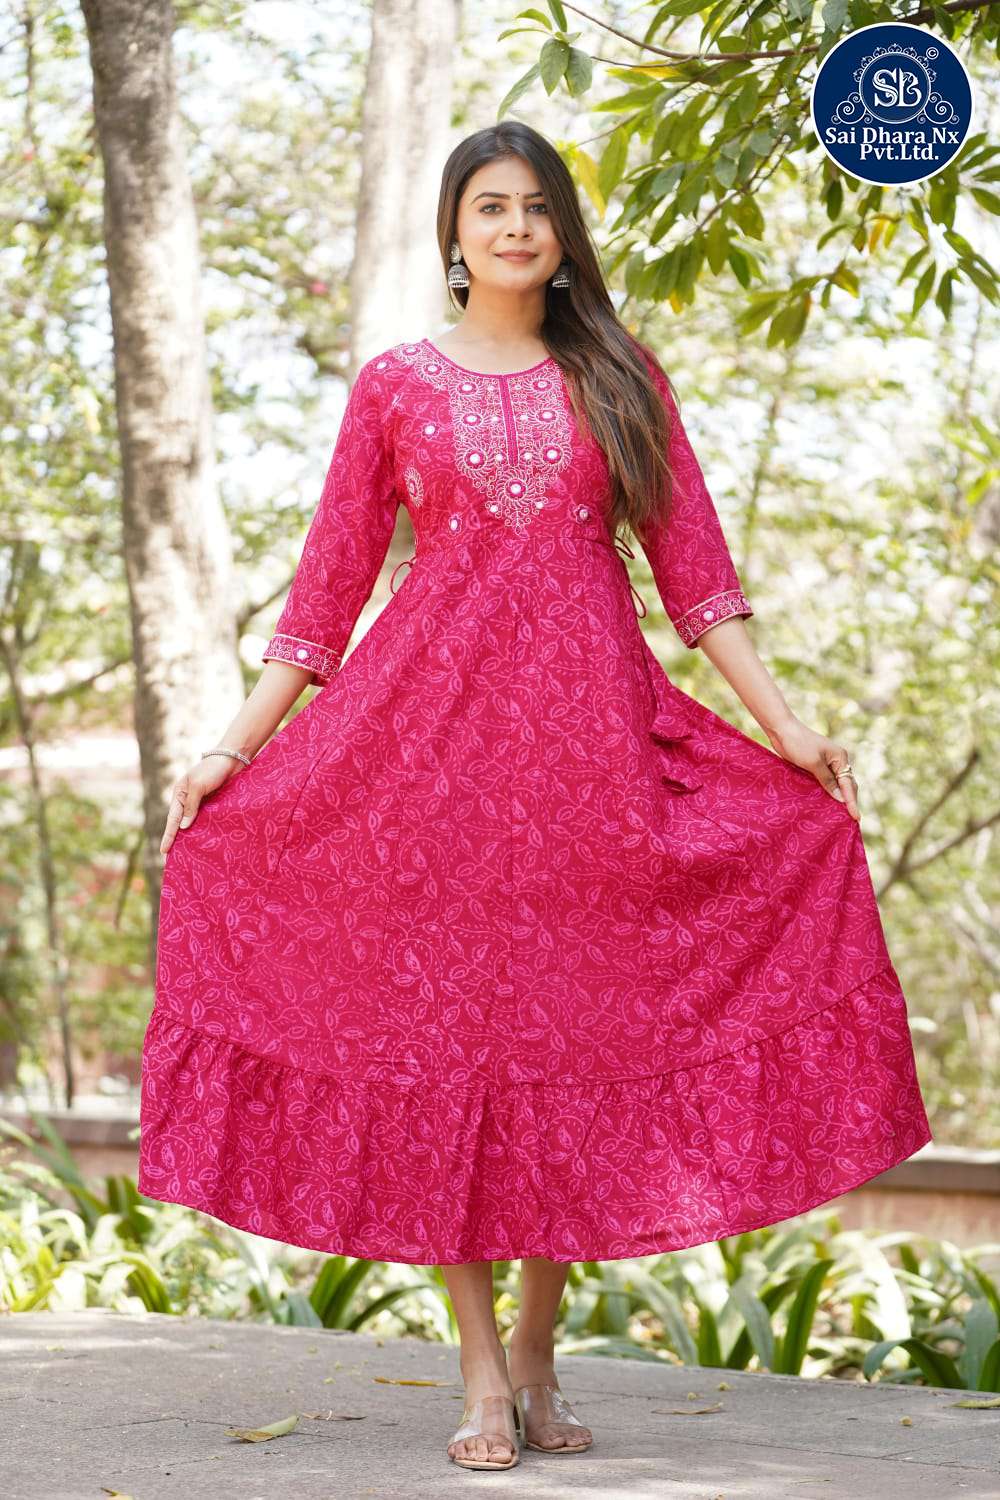 SAIDHARANX PRESENTS PURE COTTON BASED ROUND BOTTOM NEW DESIGN PINK  READYMADE GOWN COLLECTION WHOLESALE SHOP IN SURAT - SaiDharaNx